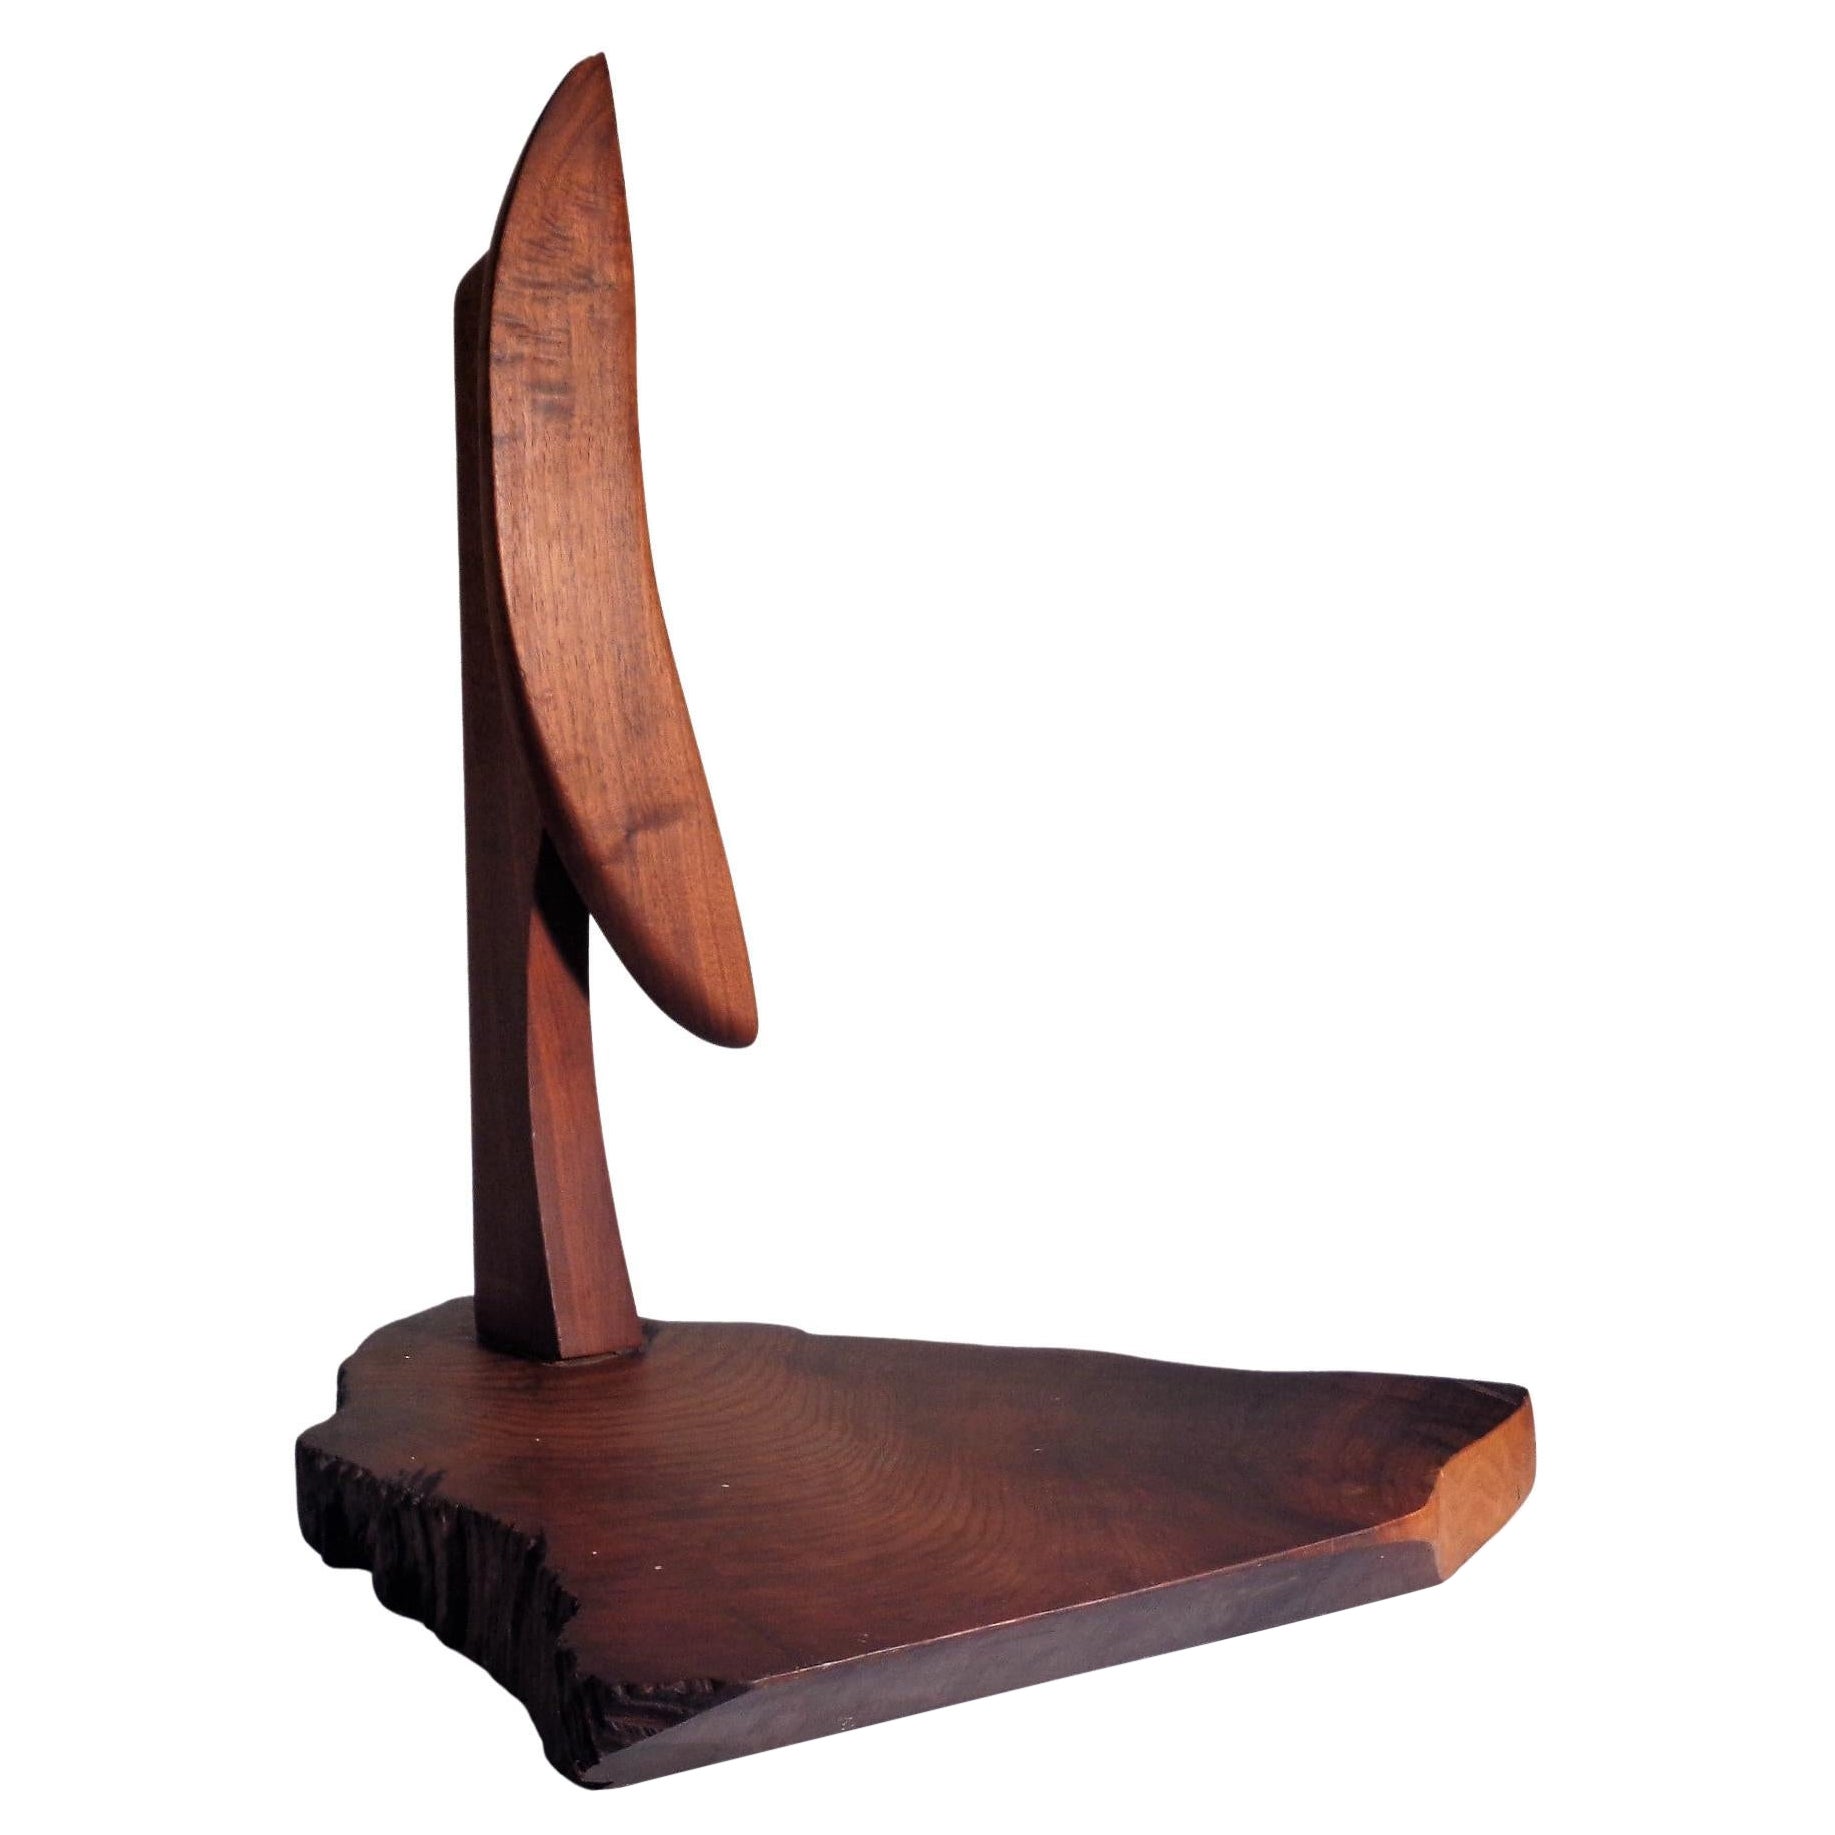 American Studio Craft Movement Modernist Abstract Wood Sculpture, 1970-1980 For Sale